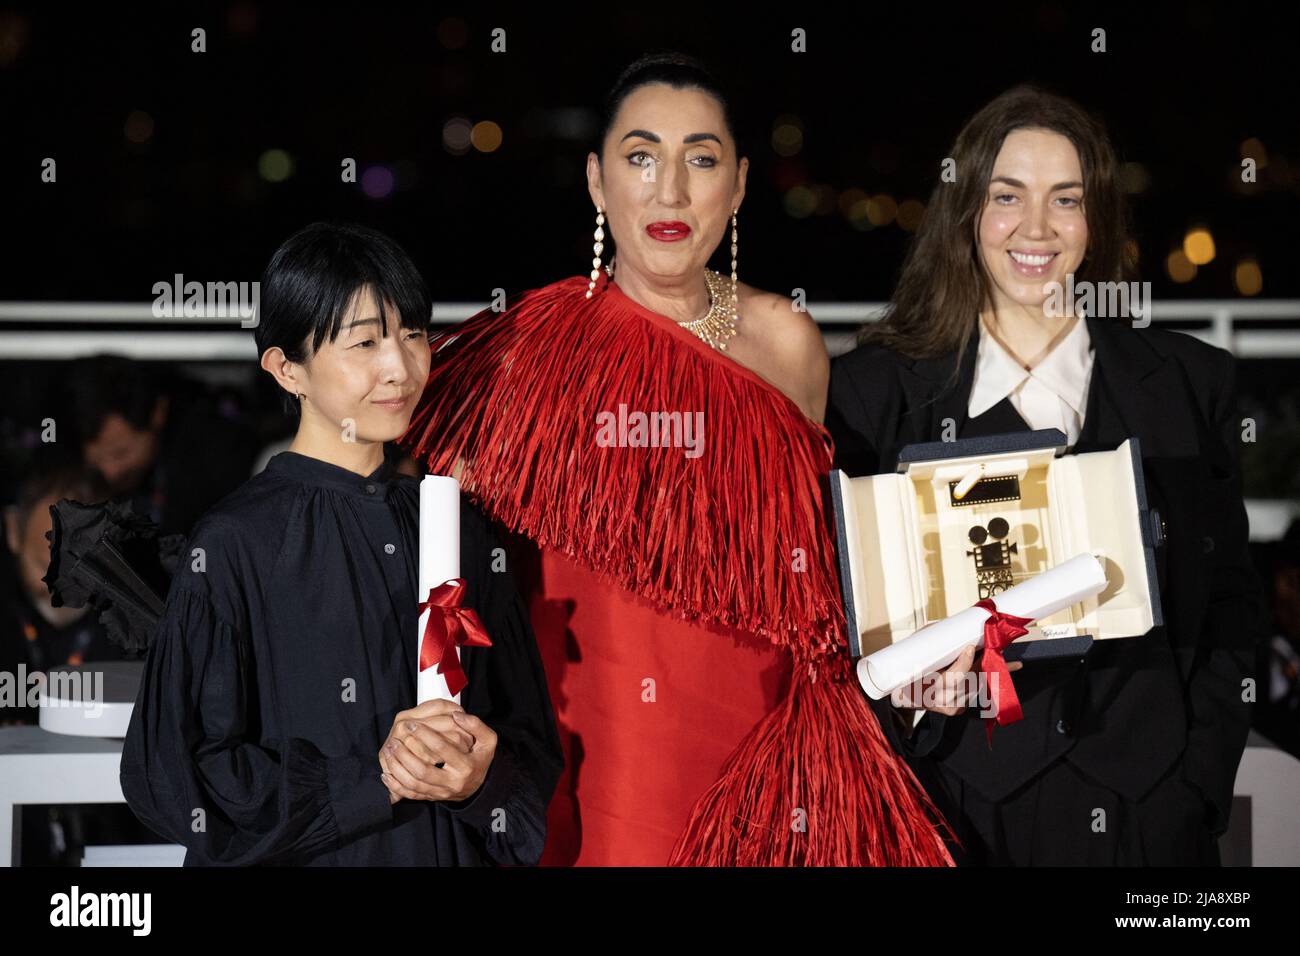 President of the Camera d'or jury, Rossy De Palma (C) poses with Director Chie Hayakawa who won the Special Mention for a first film winner for Plan 75 and Director Gina Gammell who won the Caméra d’or Award for a first film for War Pony during the 75th annual Cannes film festival at Palais des Festivals on May 28, 2022 in Cannes, France. Photo by David Niviere/ABACAPRESS.COM Stock Photo